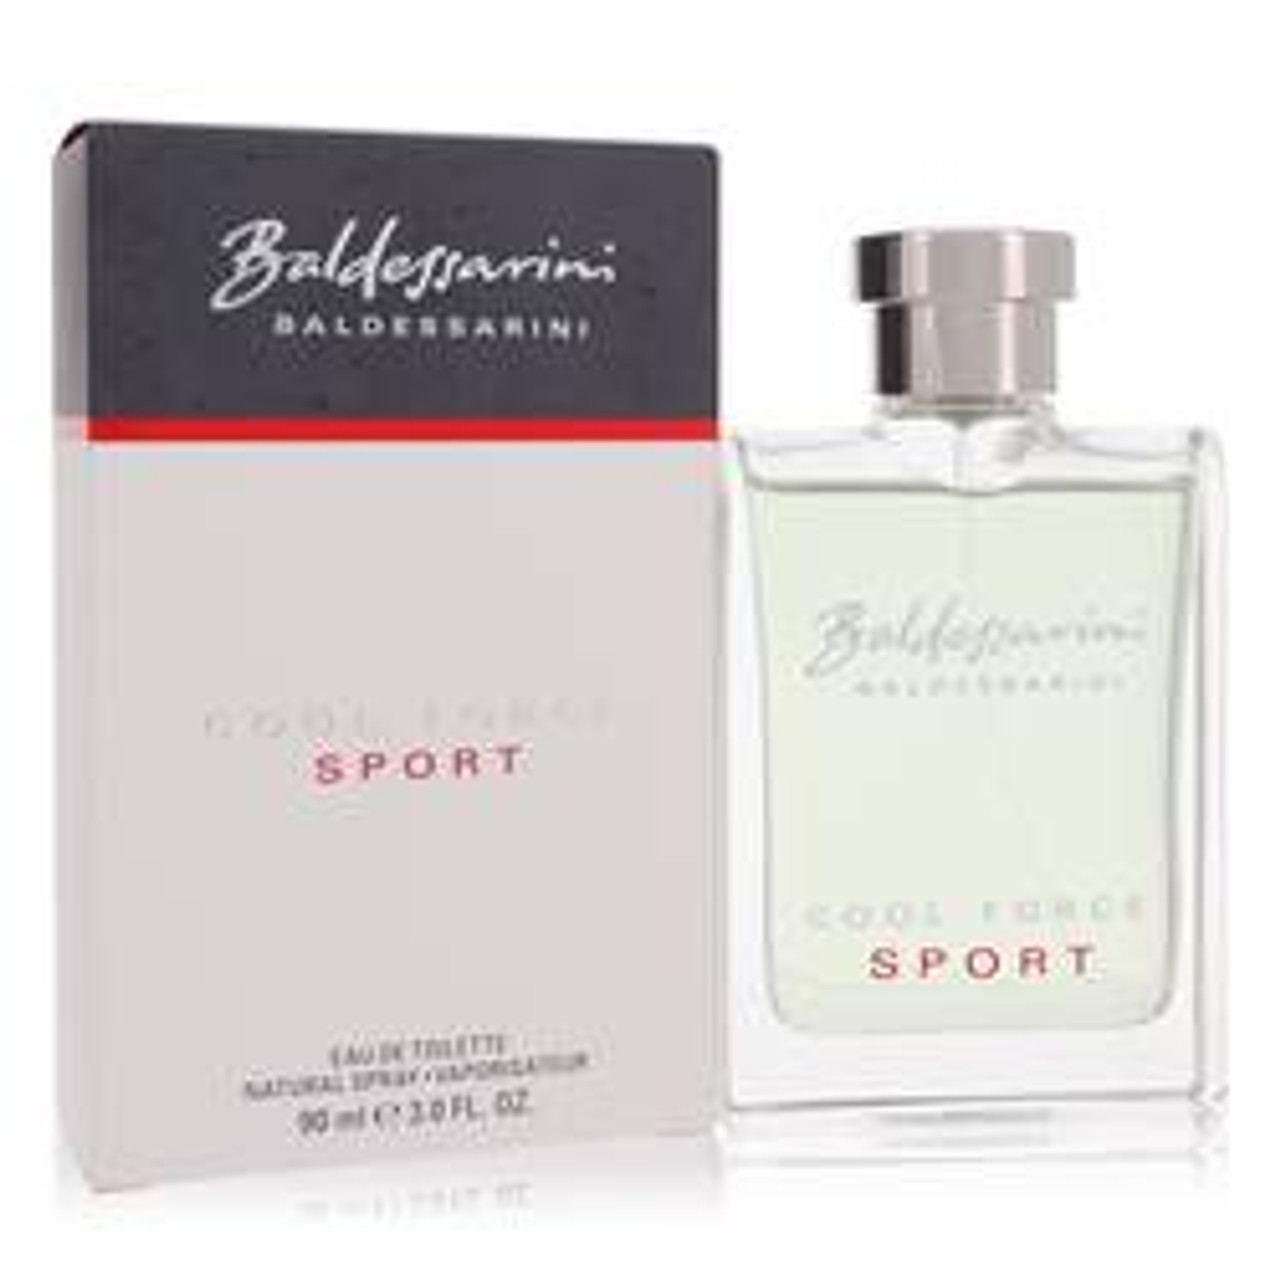 Baldessarini Cool Force Sport Cologne By Hugo Boss Eau De Toilette Spray 3 oz for Men - [From 120.00 - Choose pk Qty ] - *Ships from Miami